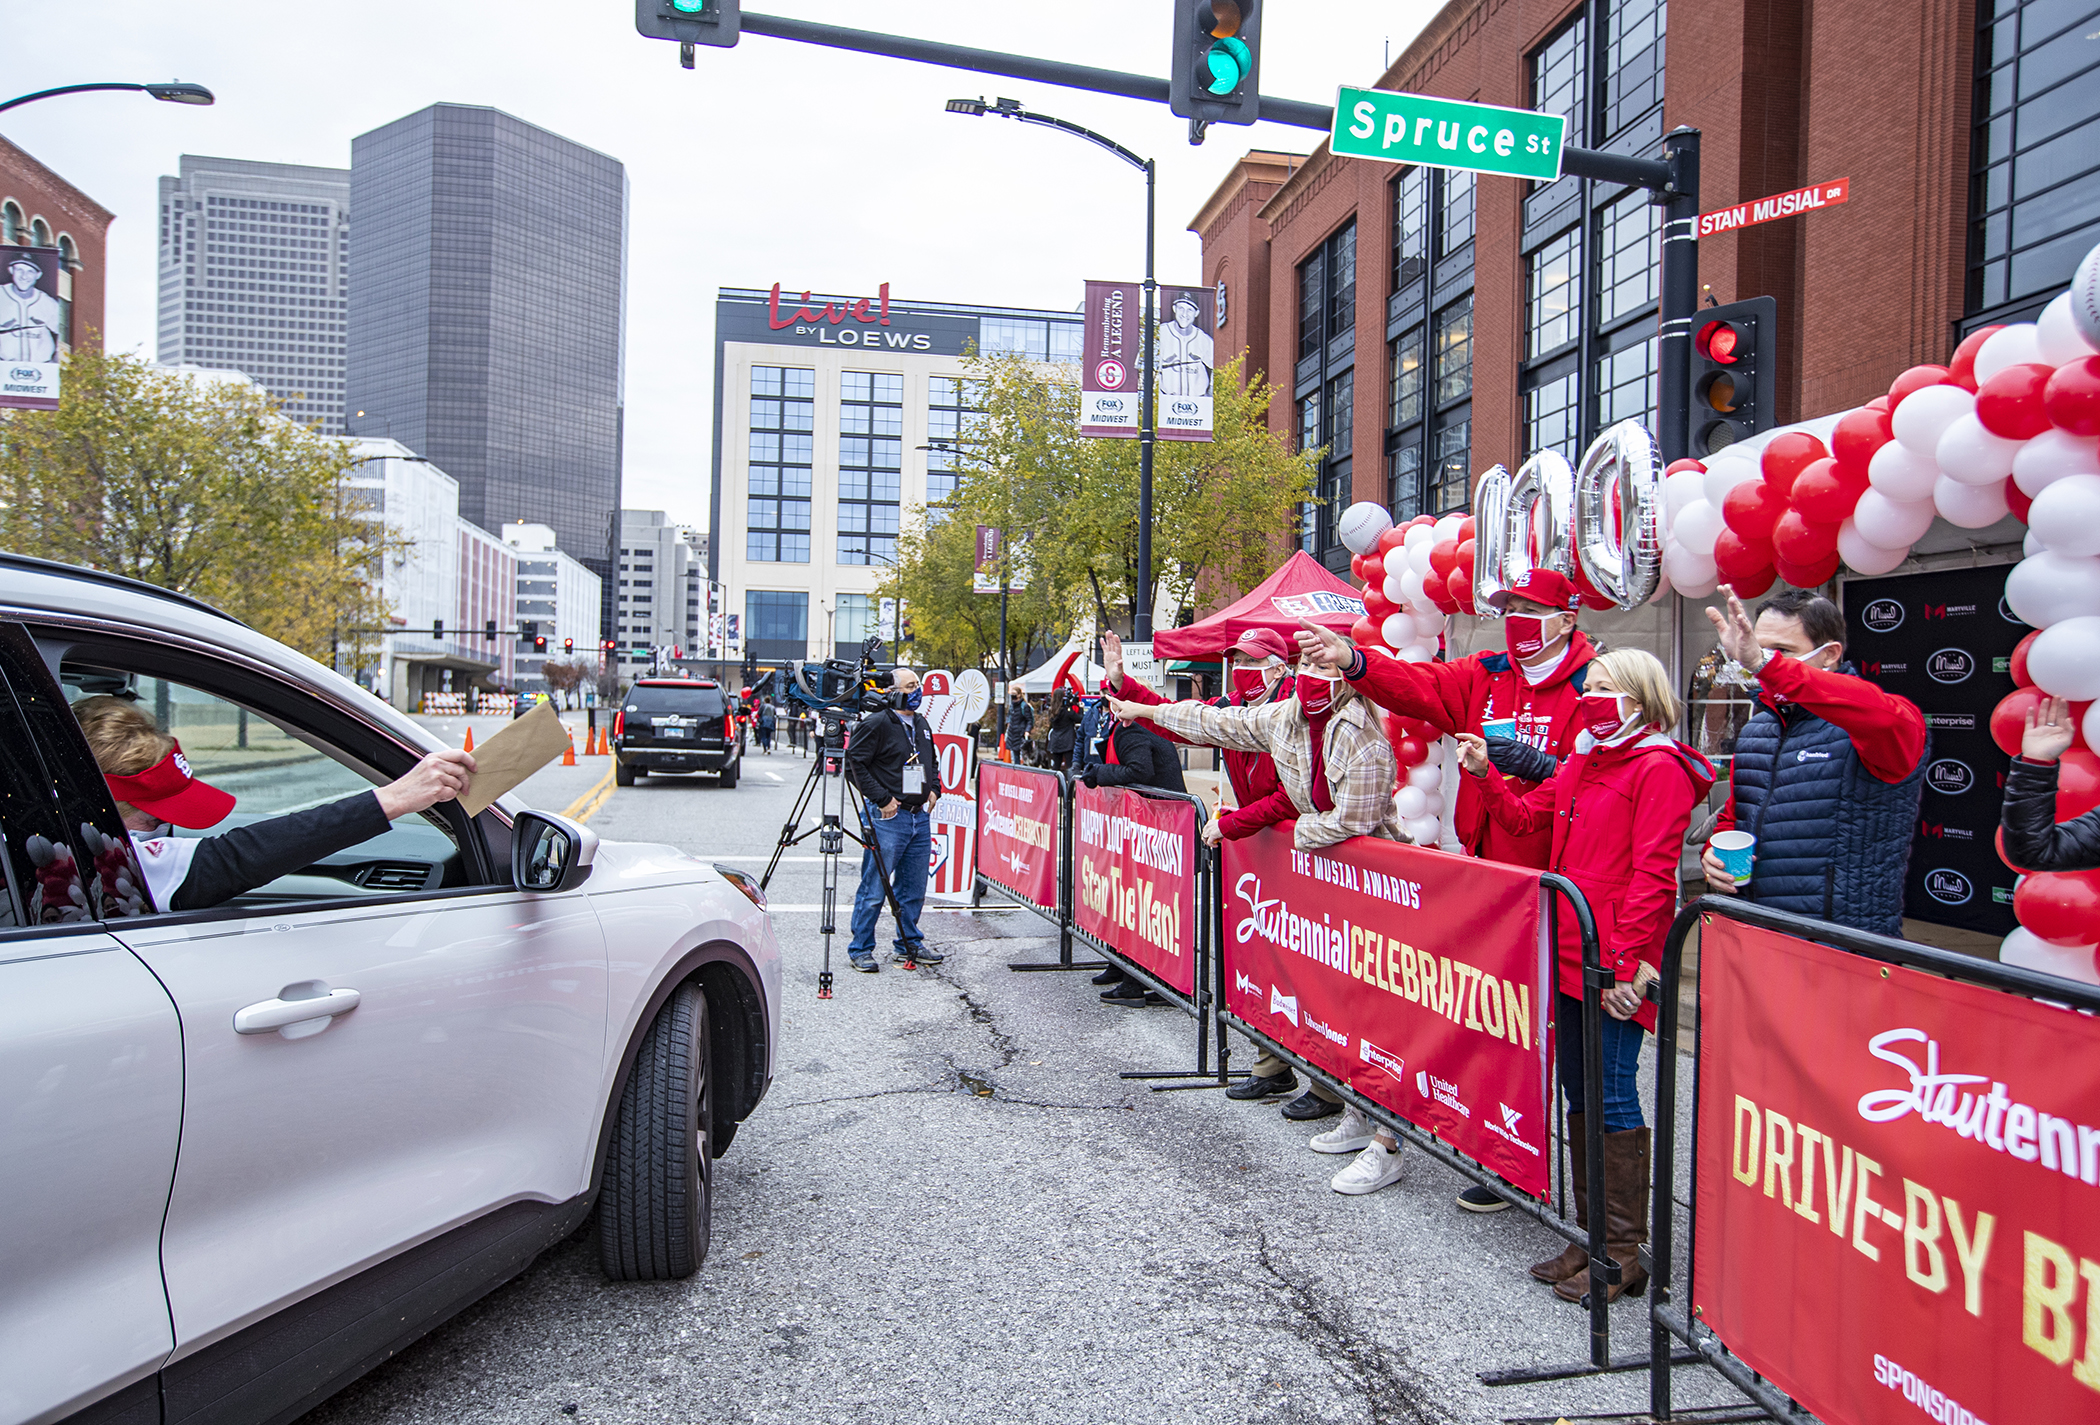 ST. LOUISANS INVITED TO PARTICIPATE IN DRIVE-BY BIRTHDAY PARTY TO SAFELY CELEBRATE 100TH ANNIVERSARY OF STAN MUSIAL’S BIRTH ON SATURDAY, NOV. 21